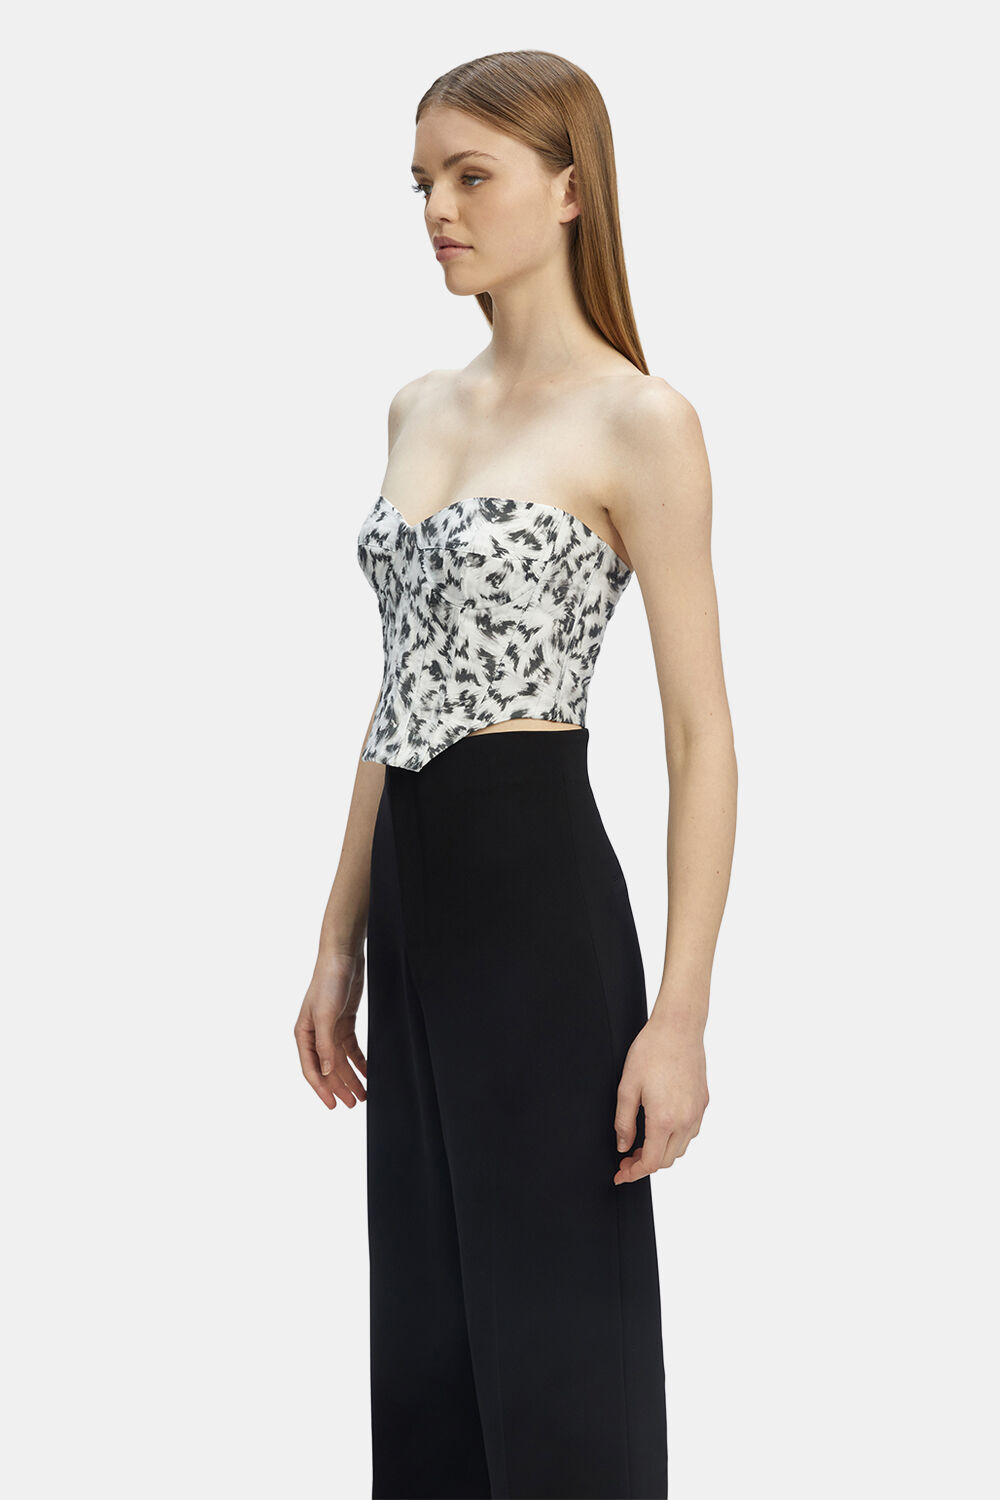 MONOCROME PRINTED BUSTIER in colour ANTHRACITE